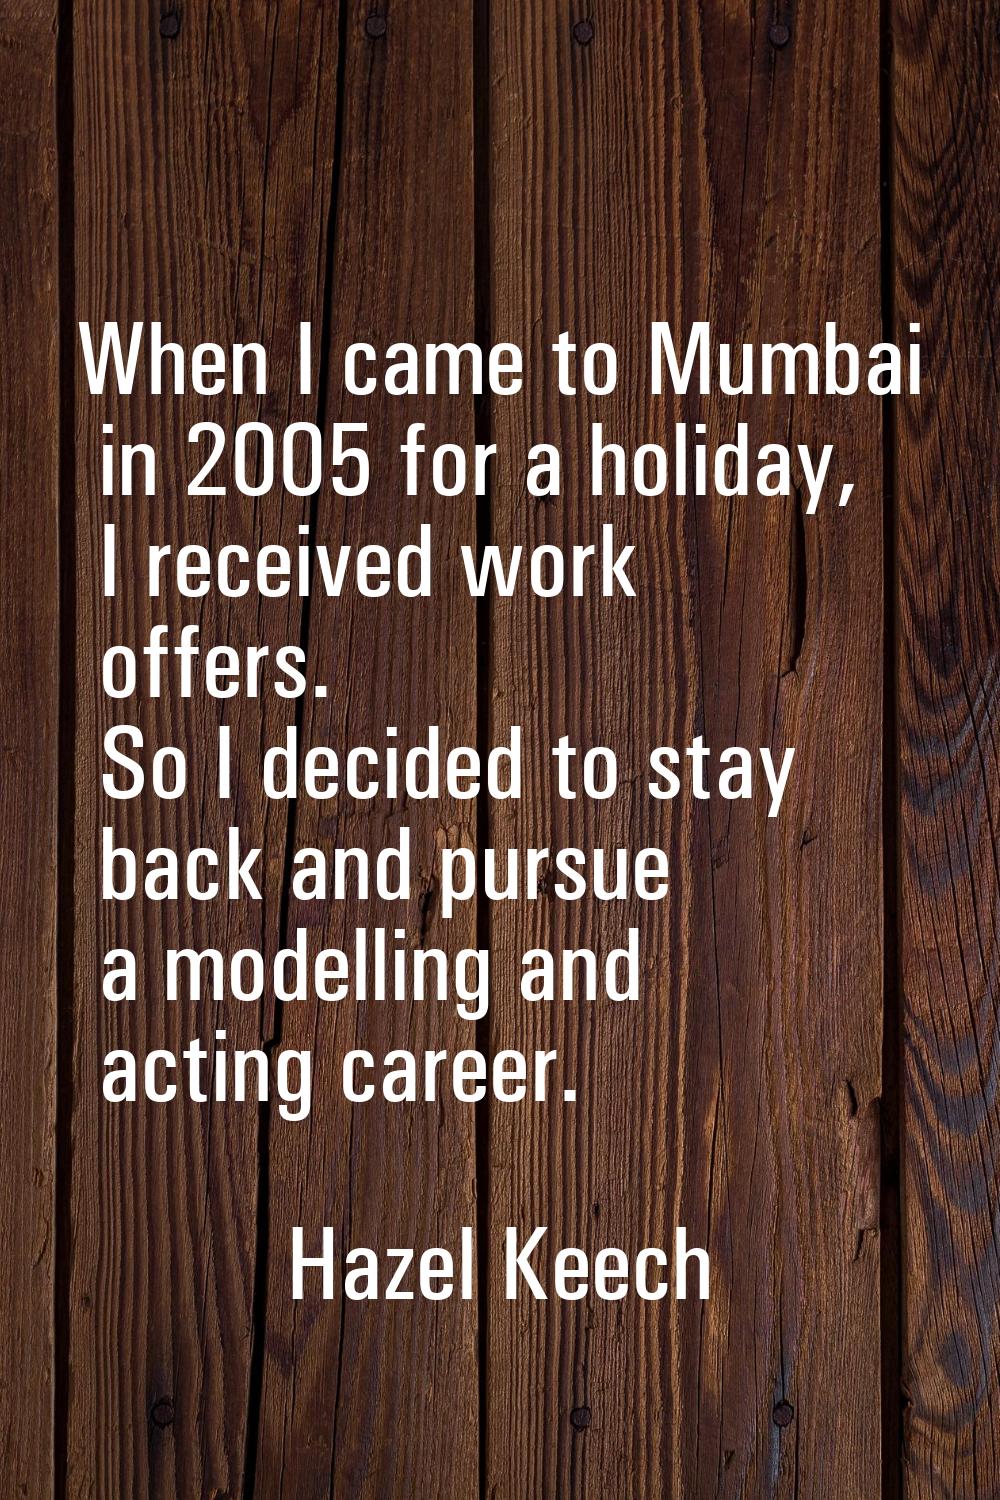 When I came to Mumbai in 2005 for a holiday, I received work offers. So I decided to stay back and 